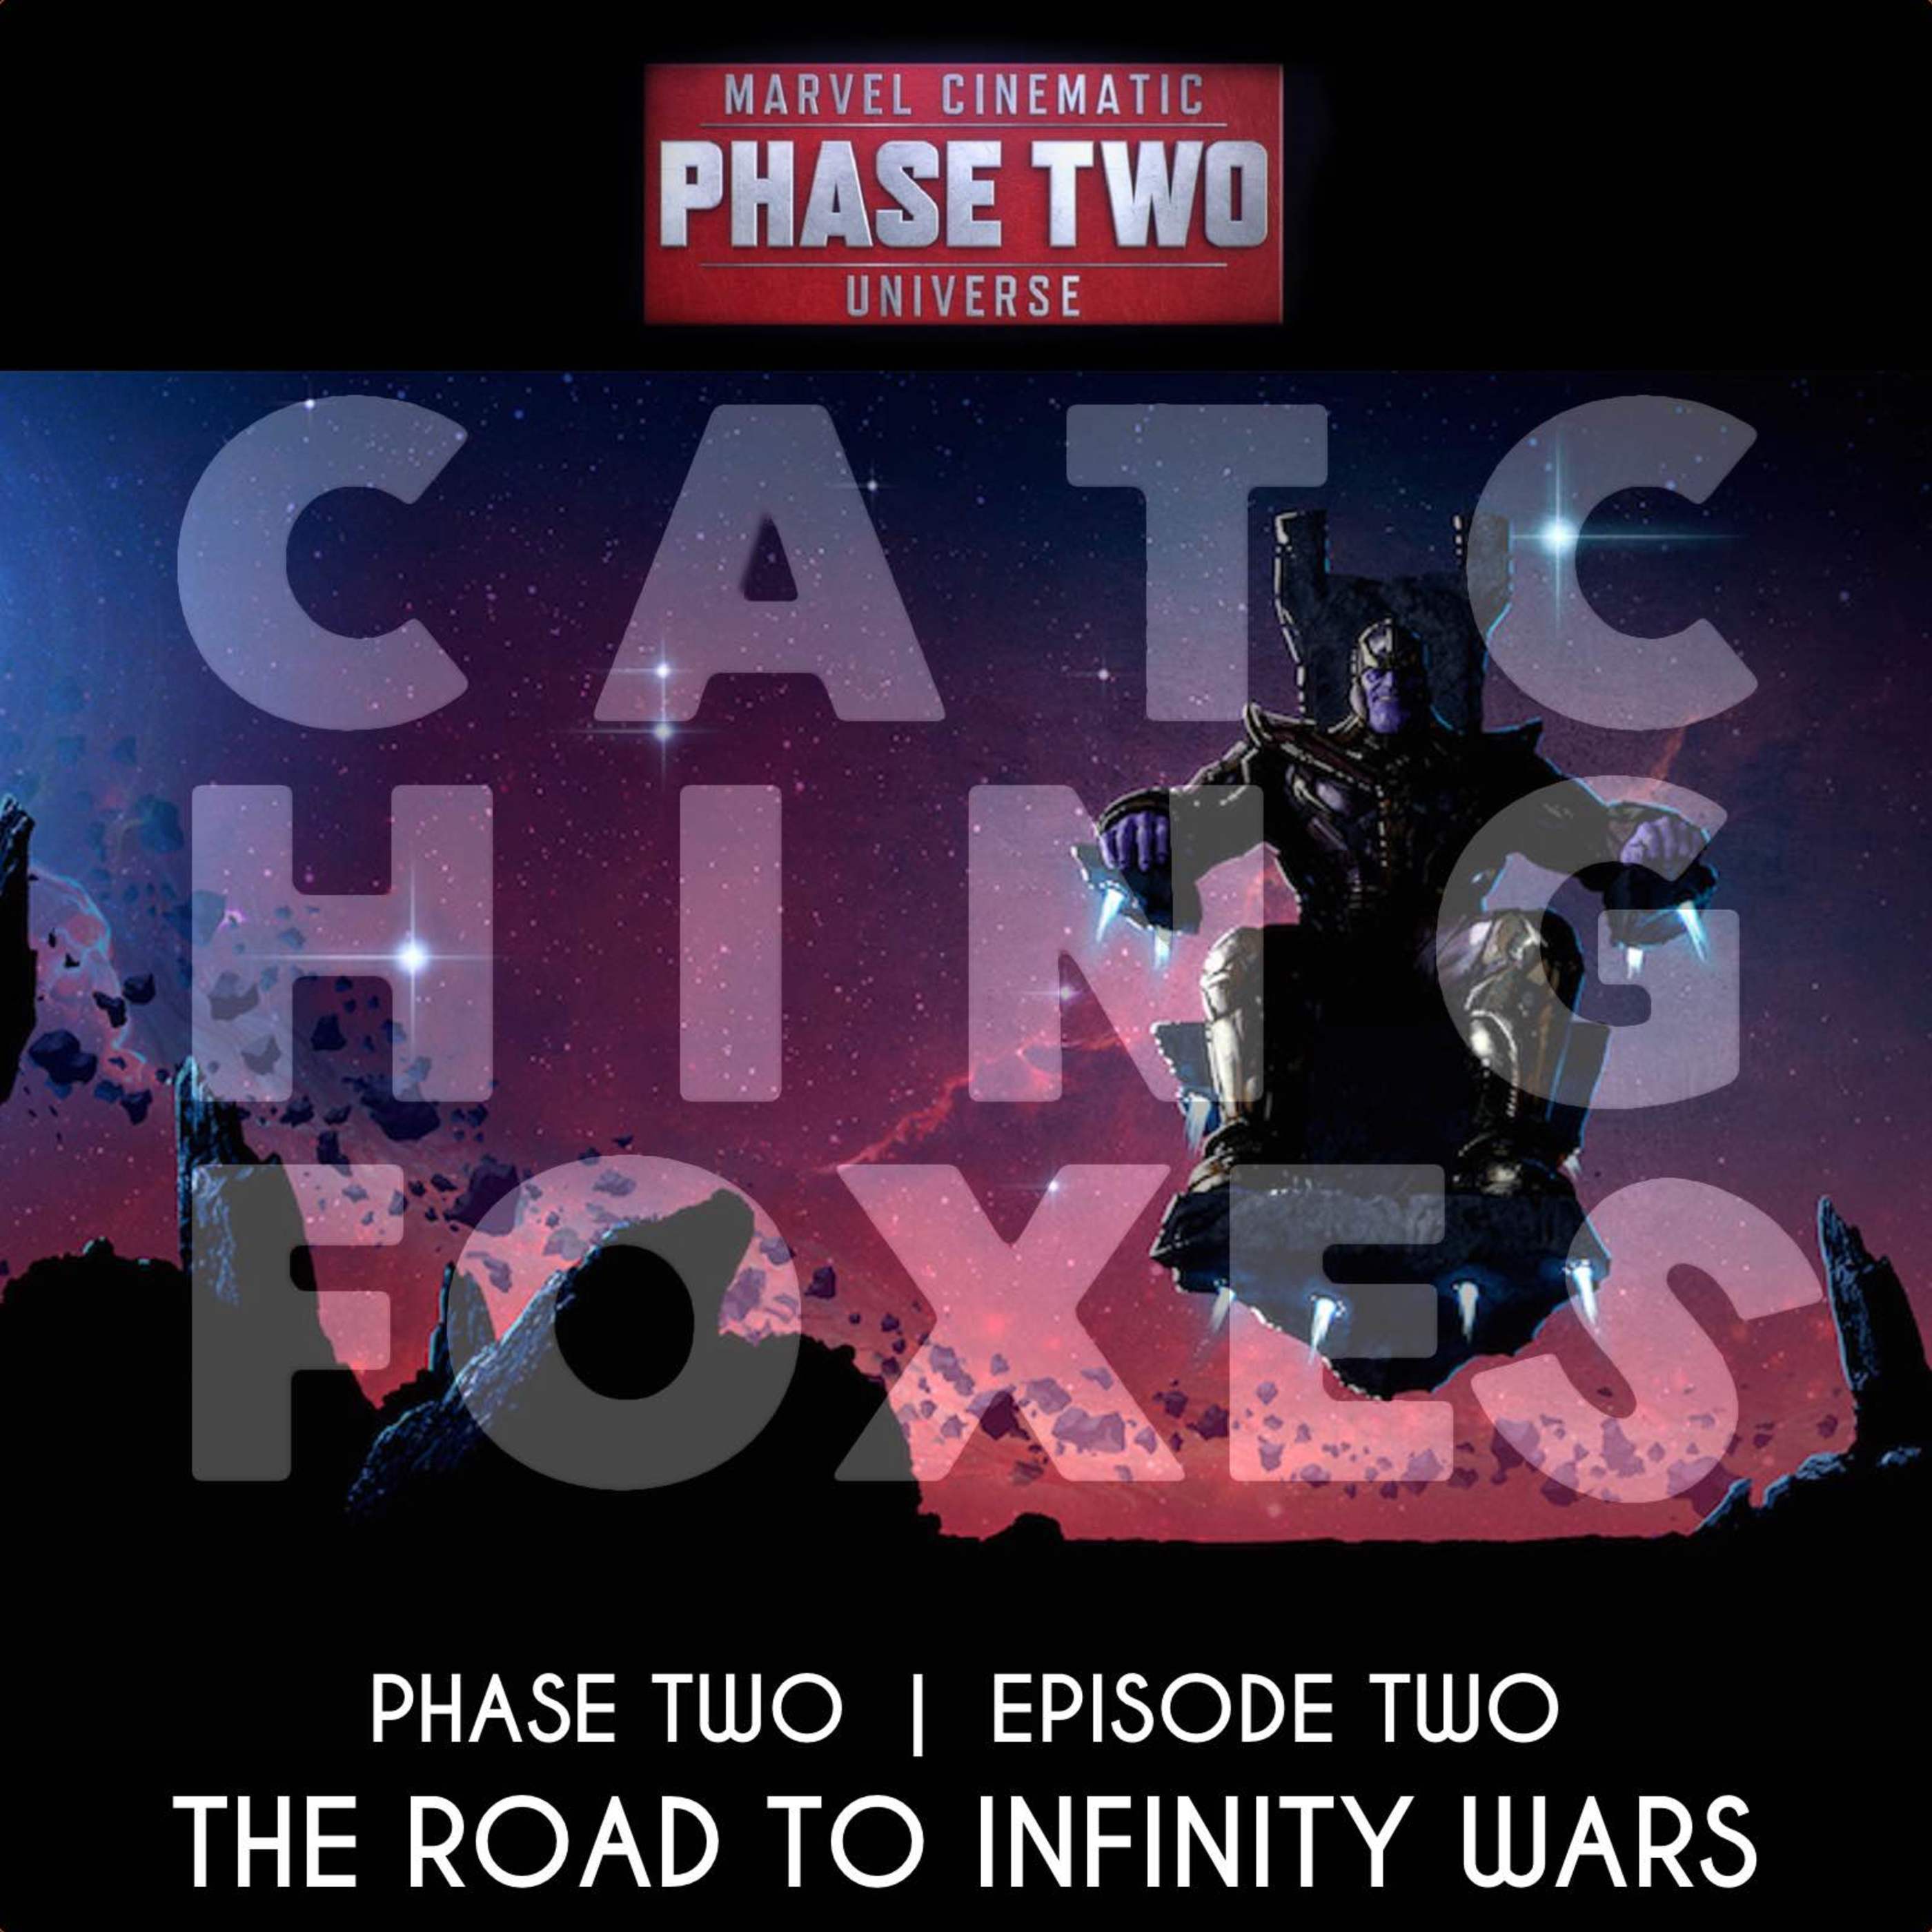 The Road to Infinity Wars! Phase Two, Episode Two